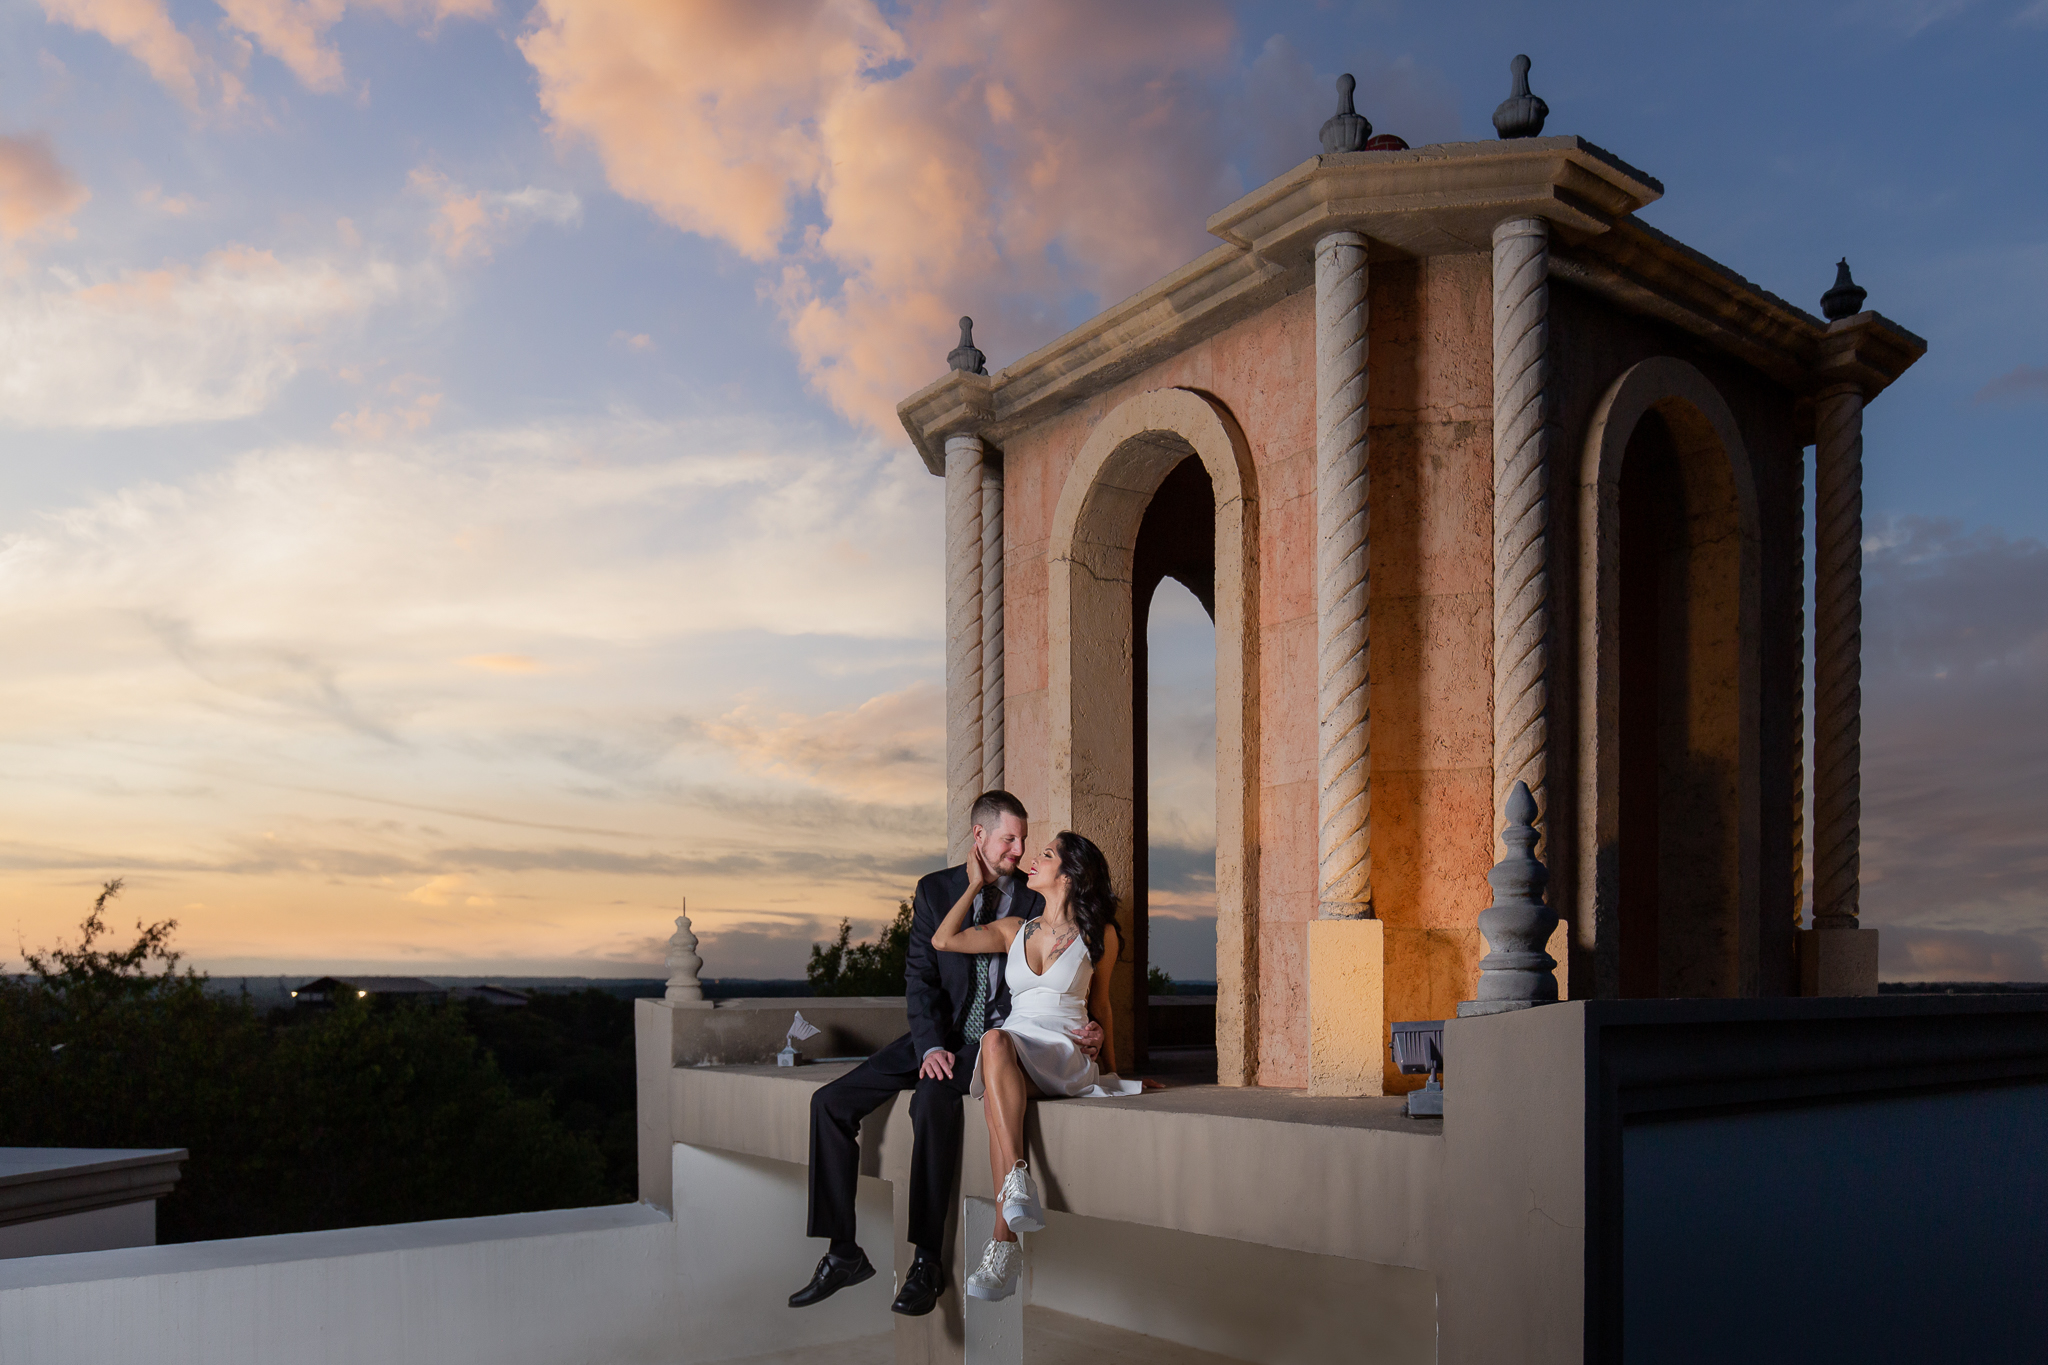 Dallas wedding photographers captures man and woman on roof during sunset